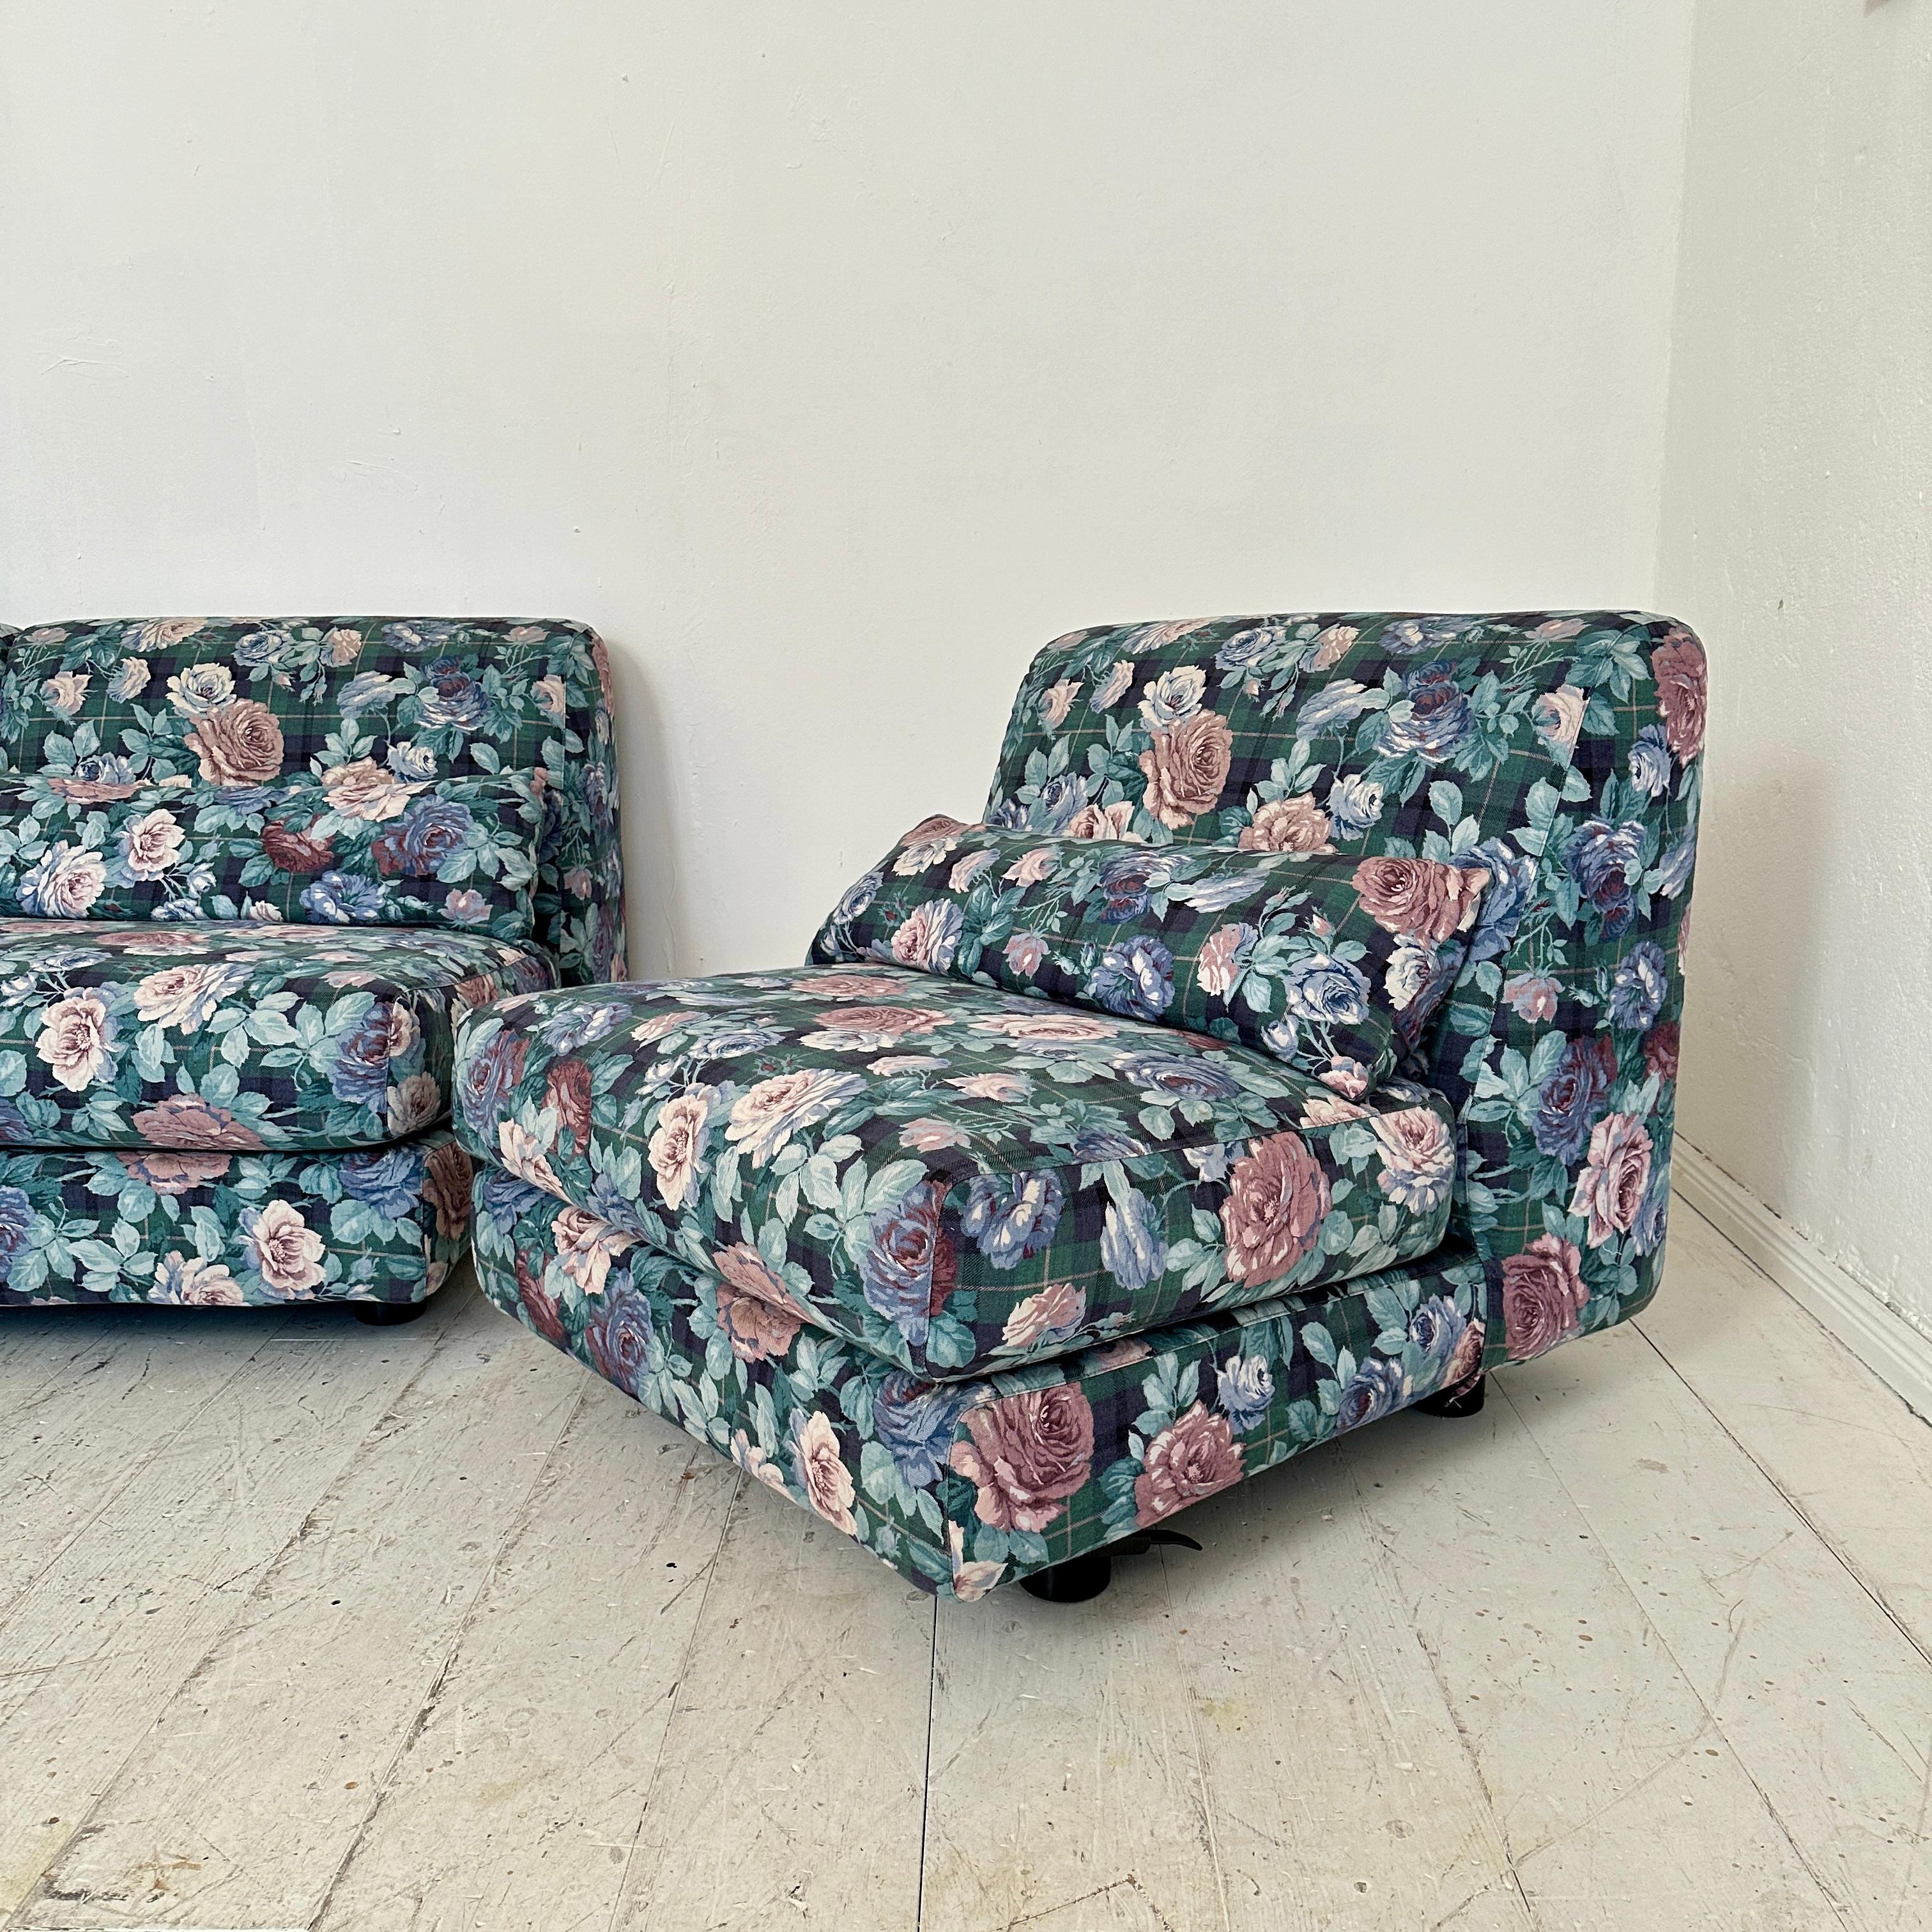 Late 20th Century Mid Century Italian Modular Sofa in 3 Pieces with a Flower Fabric, around 1970 For Sale